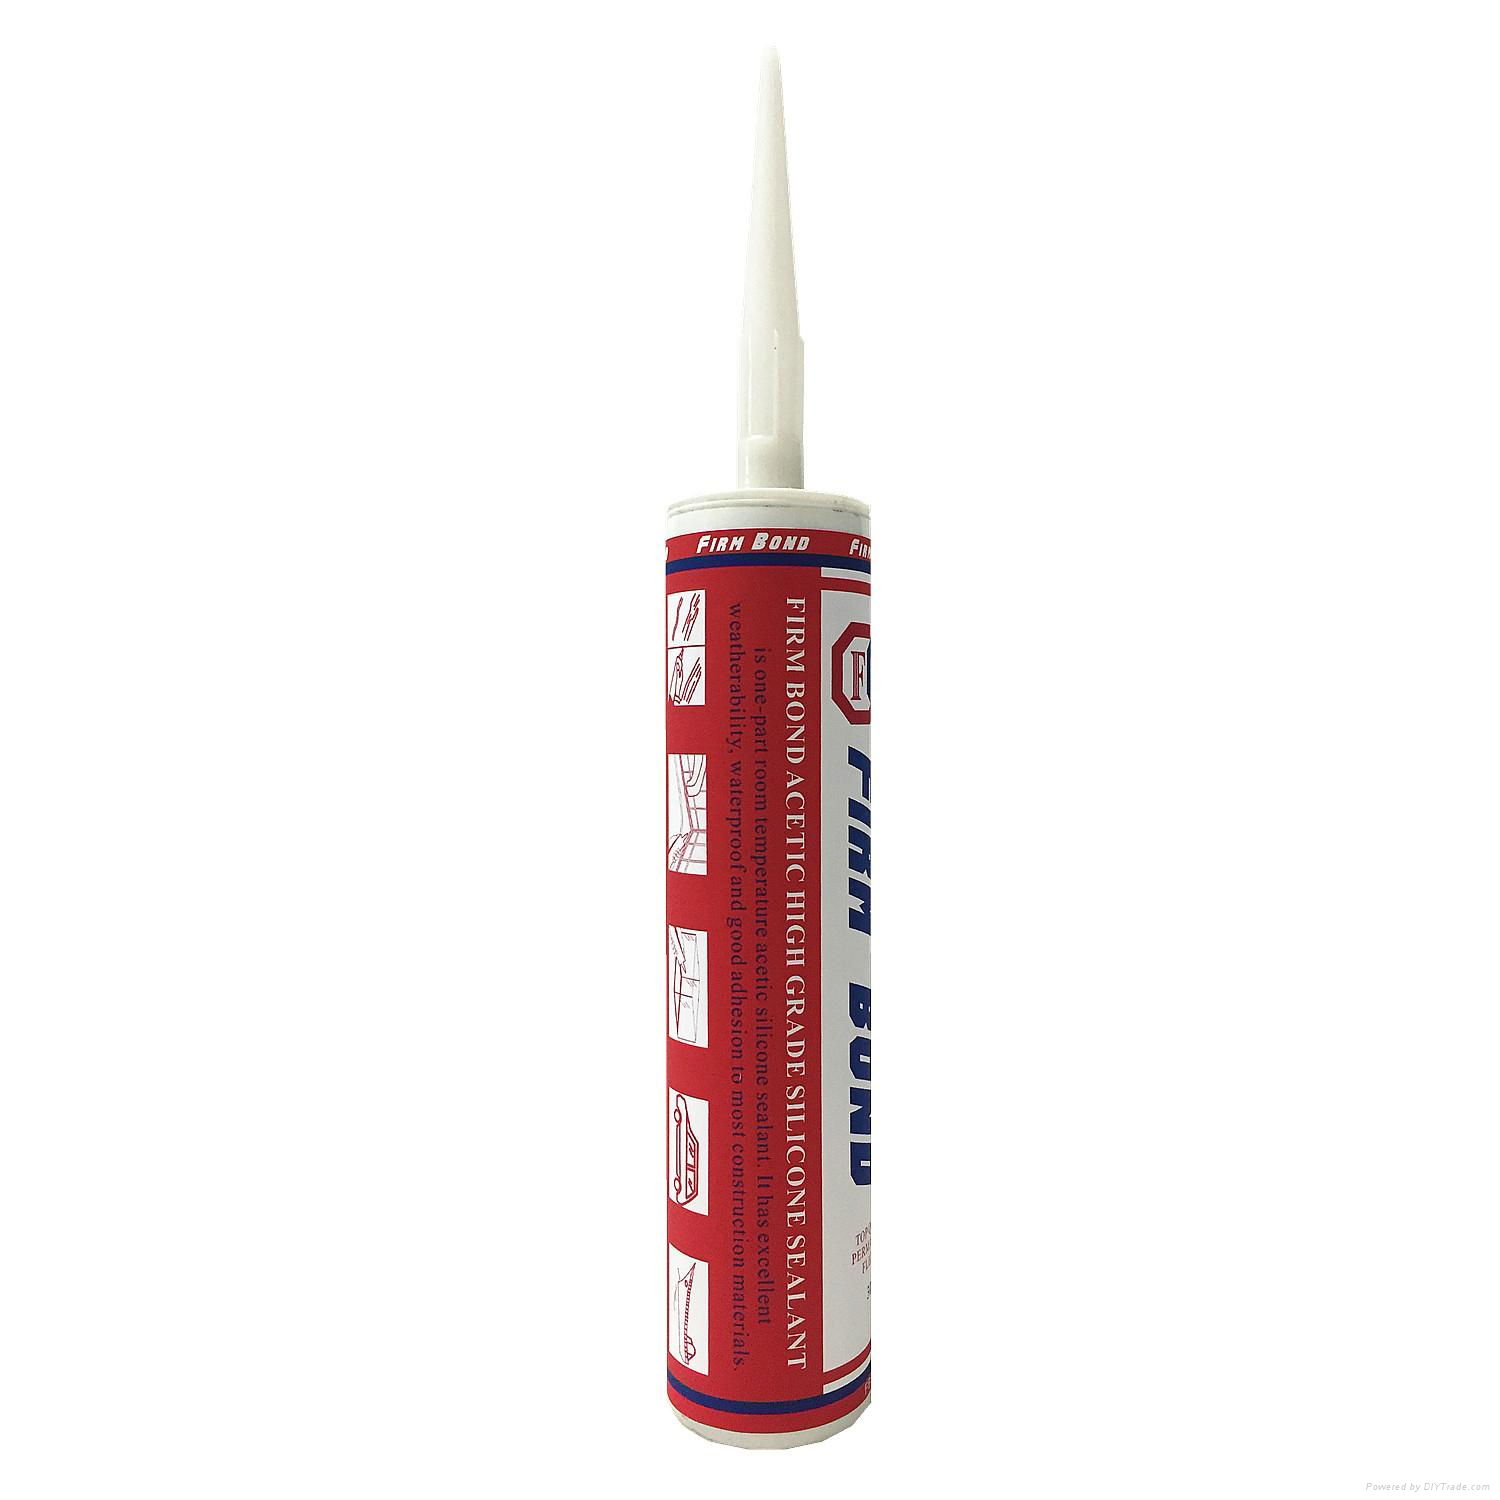 Silicone Sealant for glass